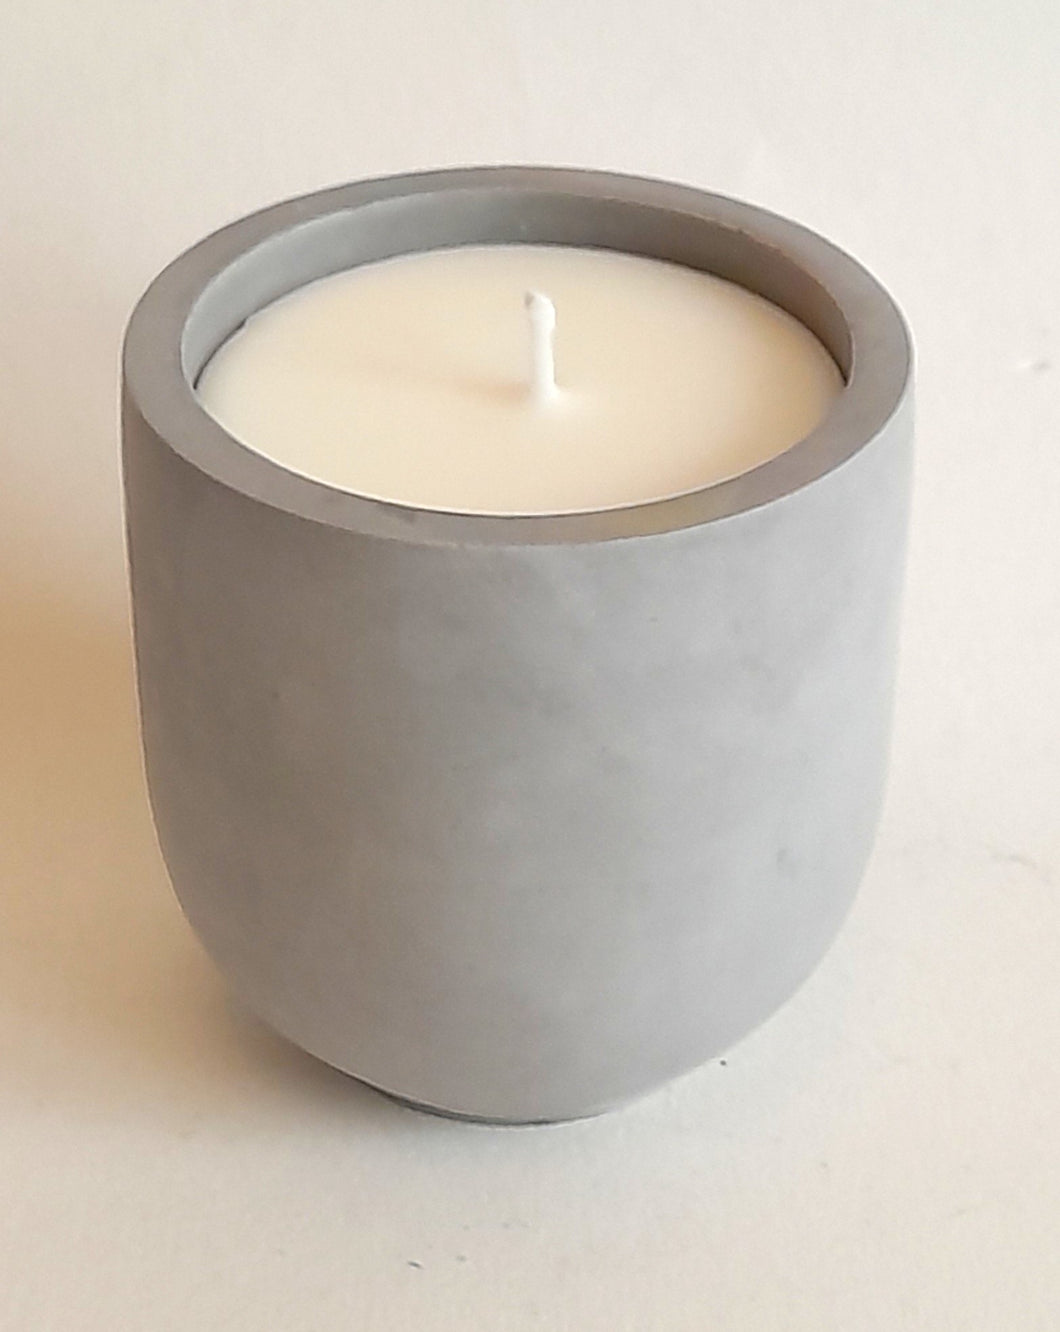 Scented Candle -Eco Luxe Hand Poured Candle